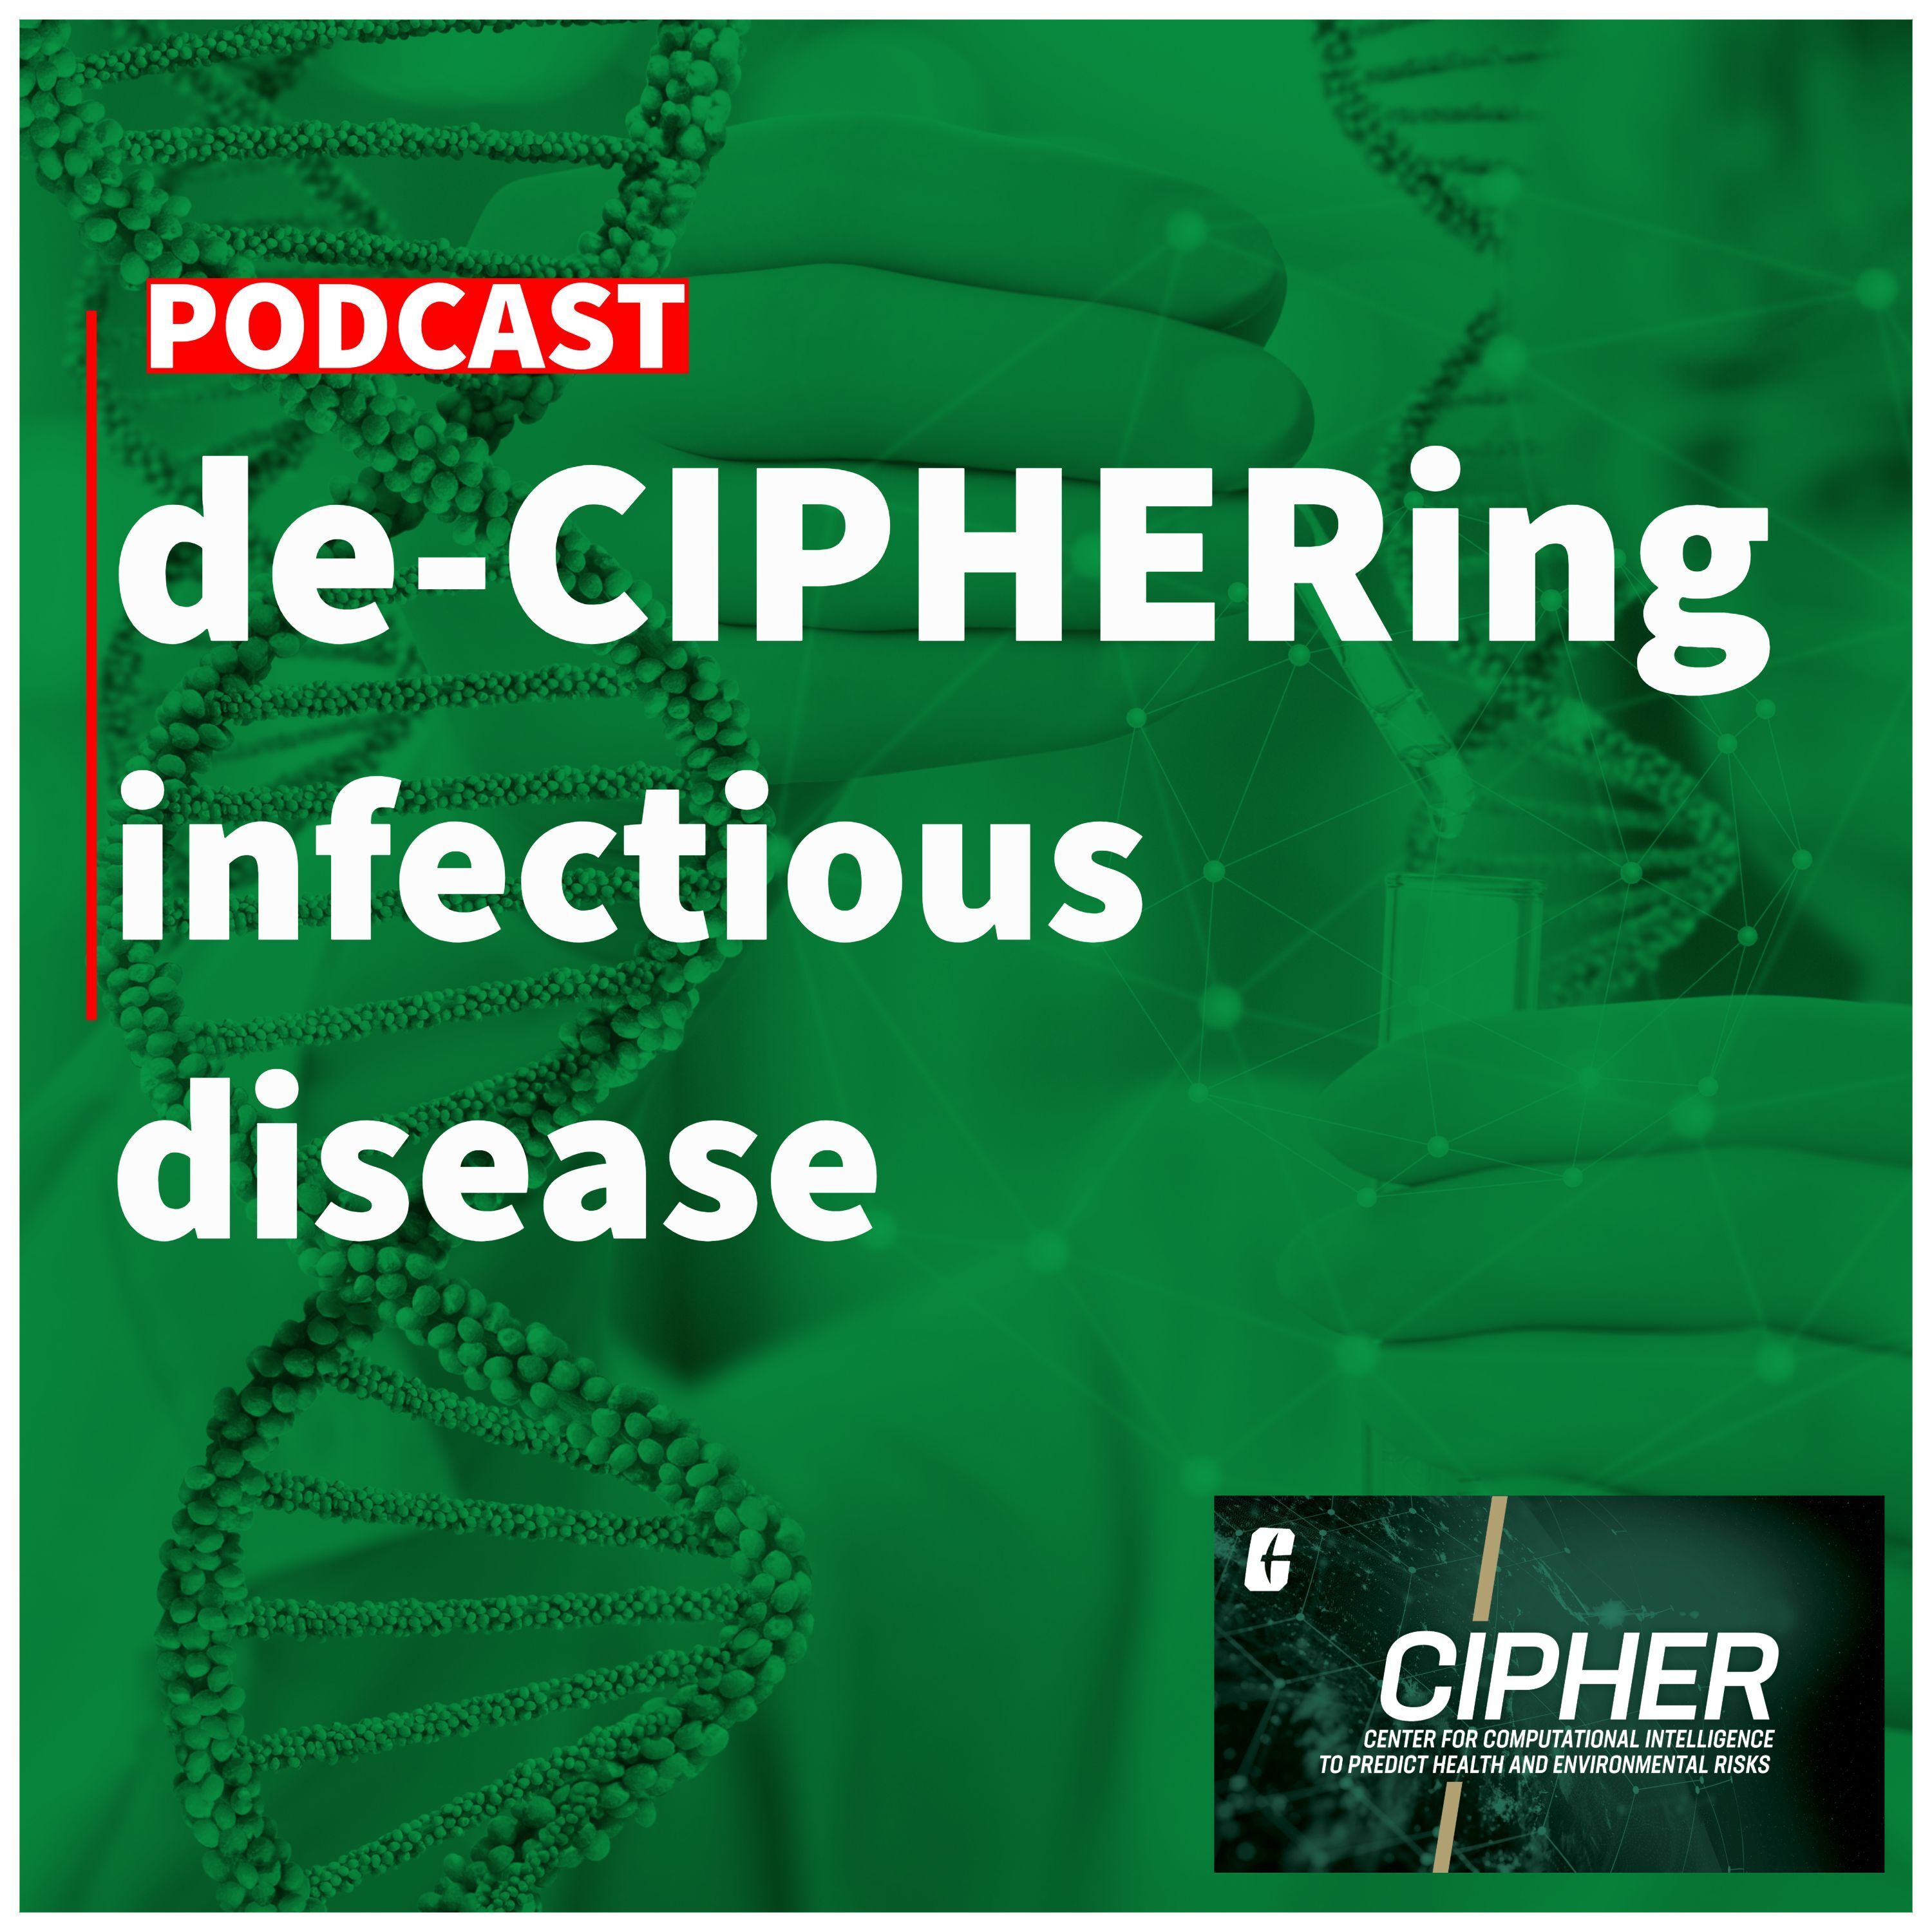 Find the podcast at [deciphering.podbean.com](https://deciphering.podbean.com/)